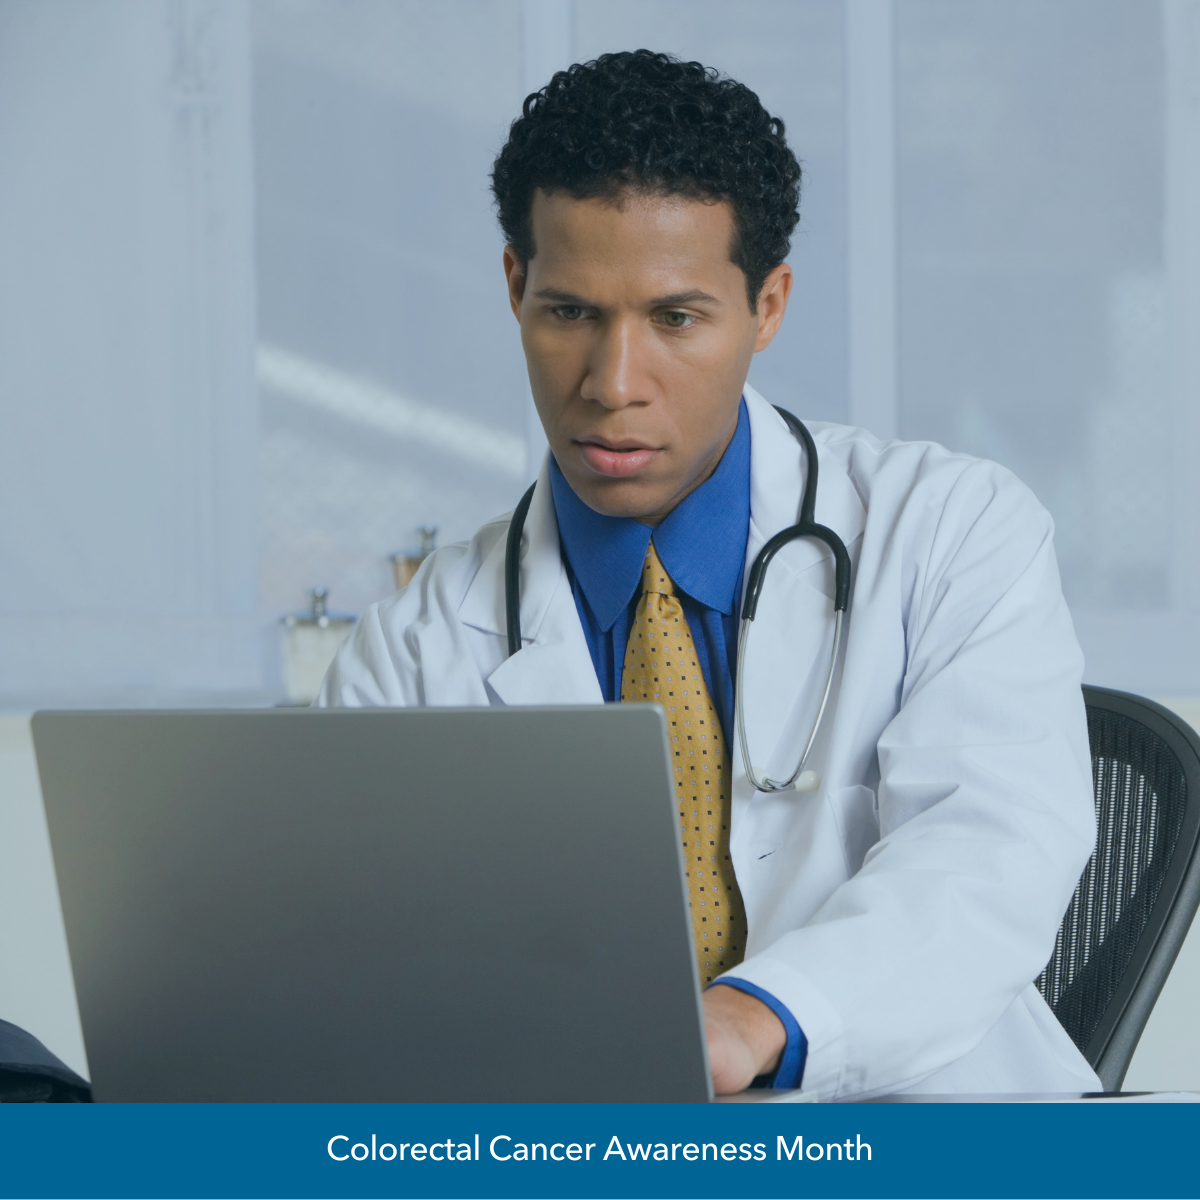 Image of Black male doctor working on computer